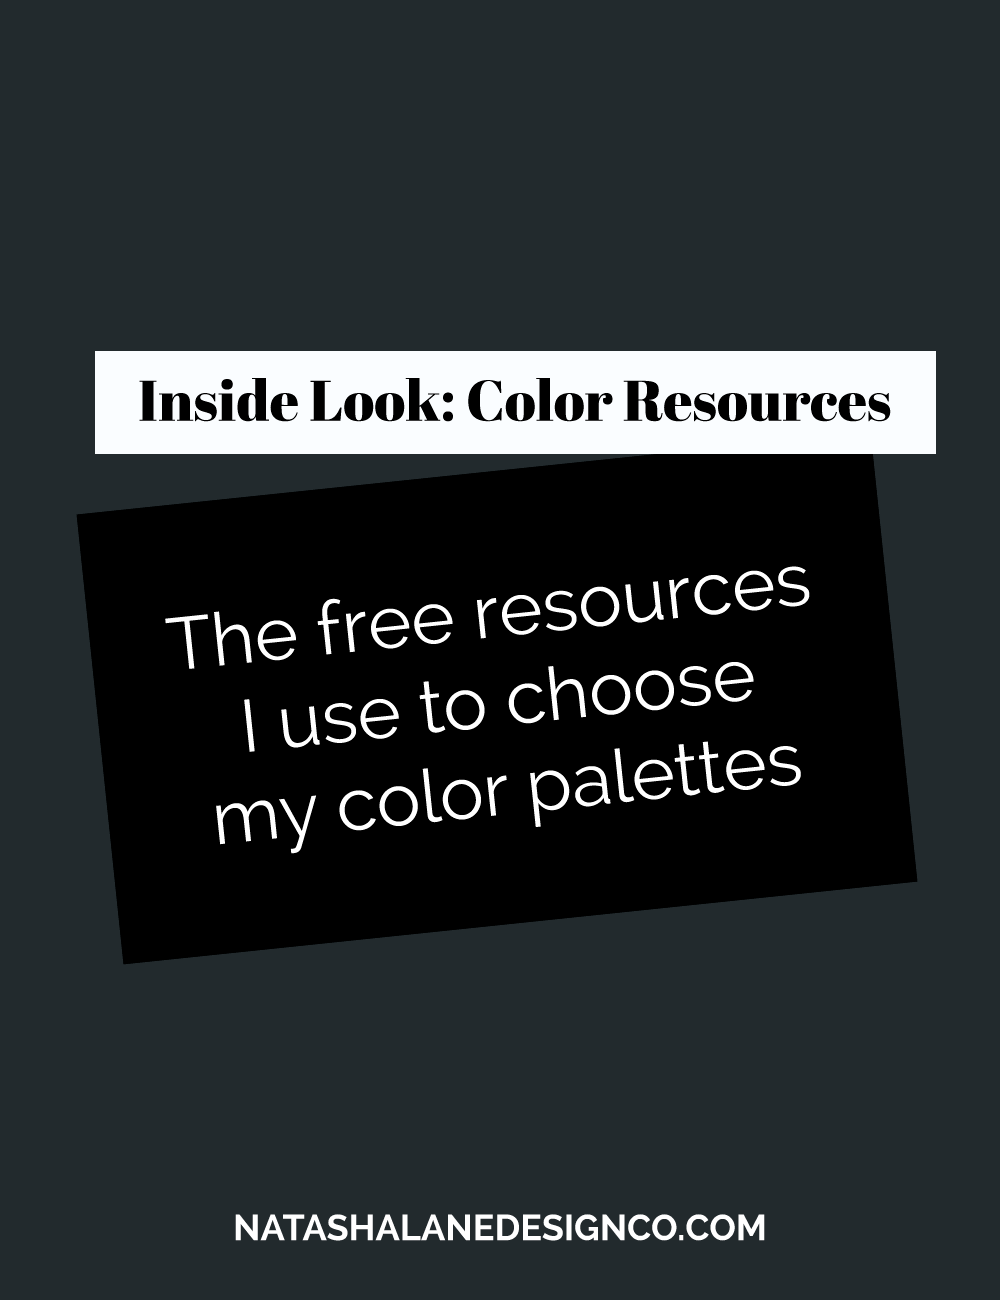 Inside Look: Color Resources